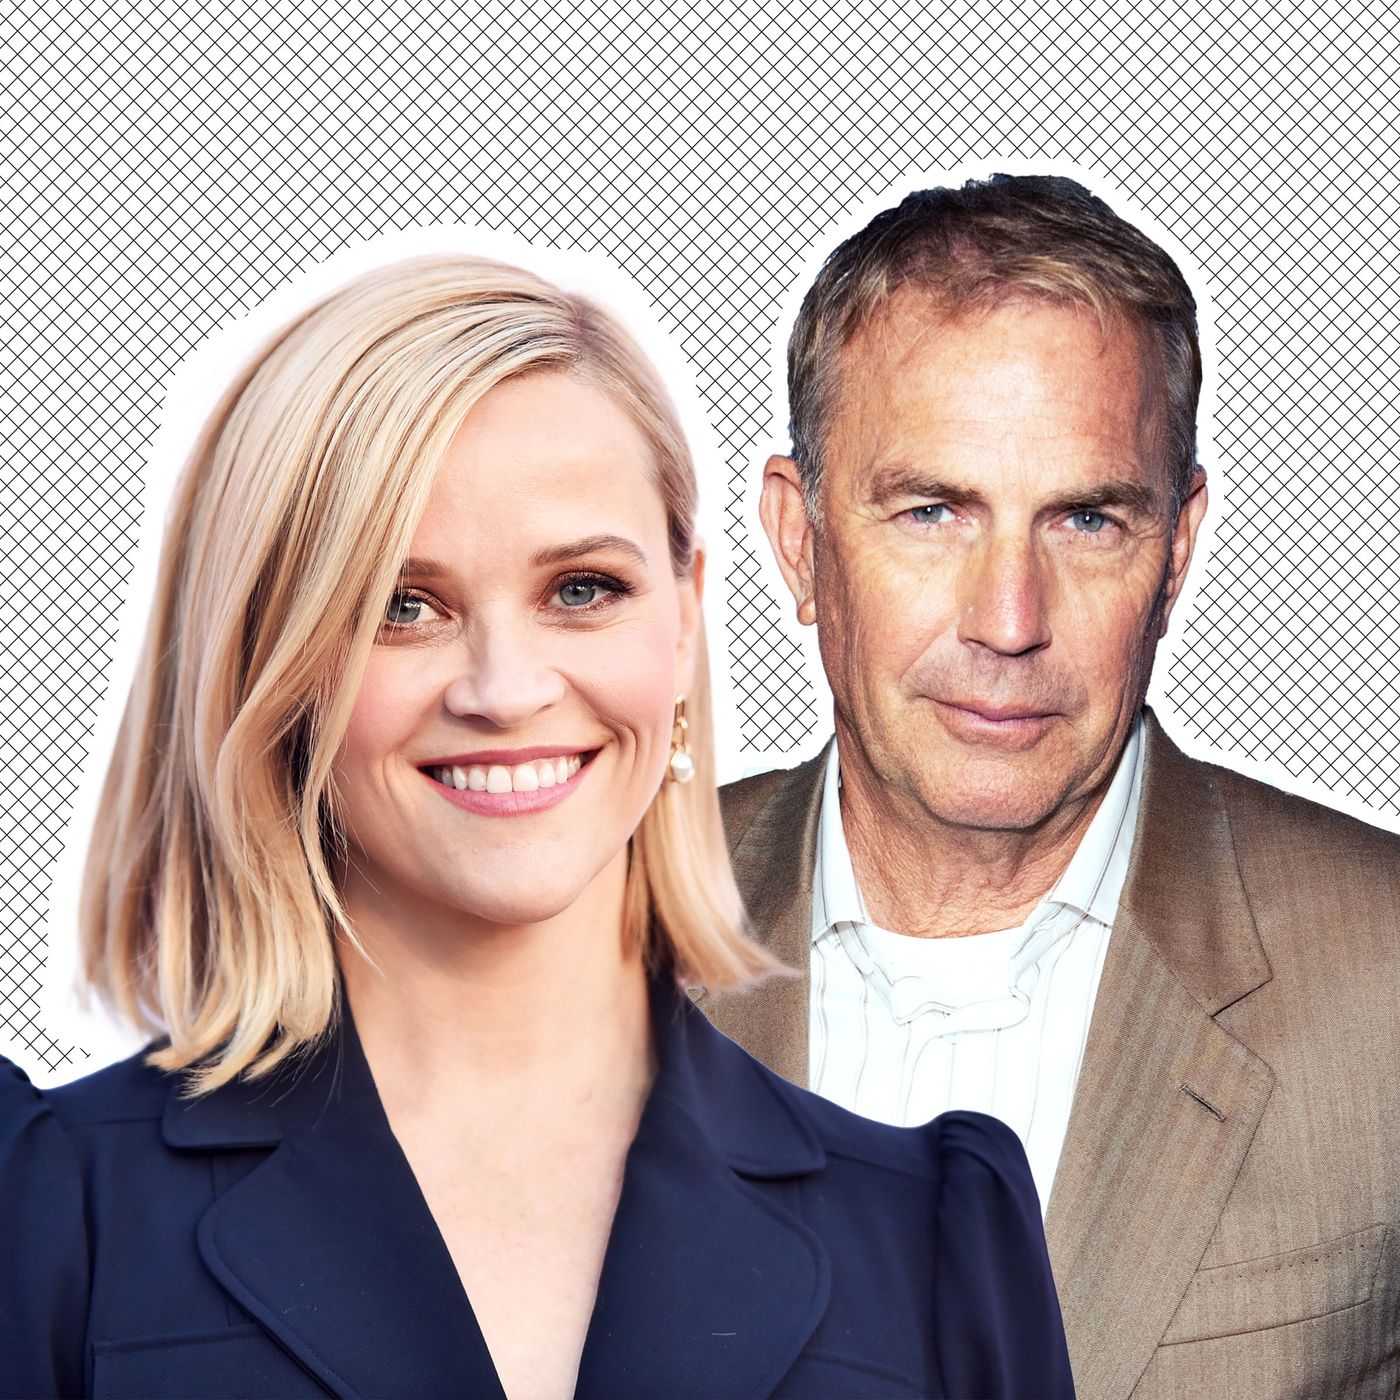 Kevin Costner Sex Videos - Reese Witherspoon and Kevin Costner Are Not Dating